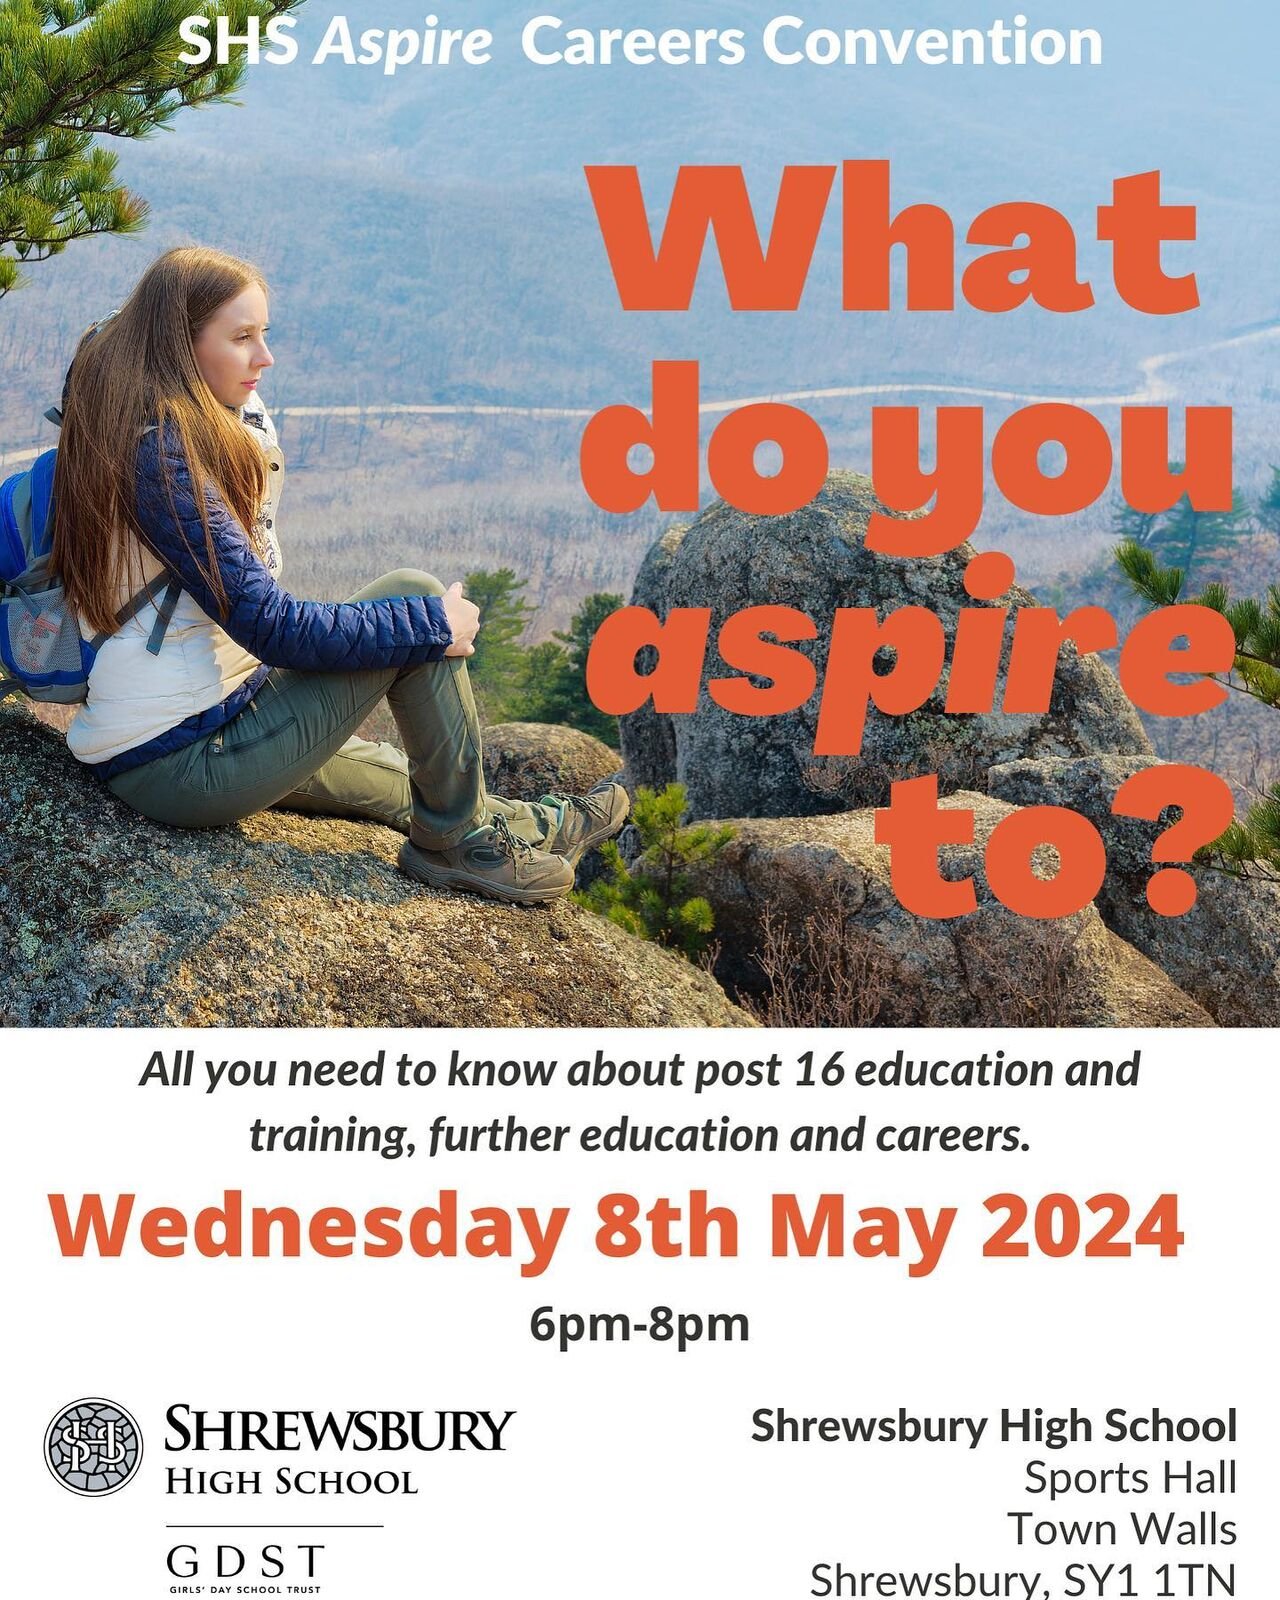 Really looking forward to heading to the Aspire Careers Convention tonight to talk all things Creative Industry! 
As an alumnus of Shrewsbury High School, it's a great opportunity to talk to parents and students about the viability of the industry an